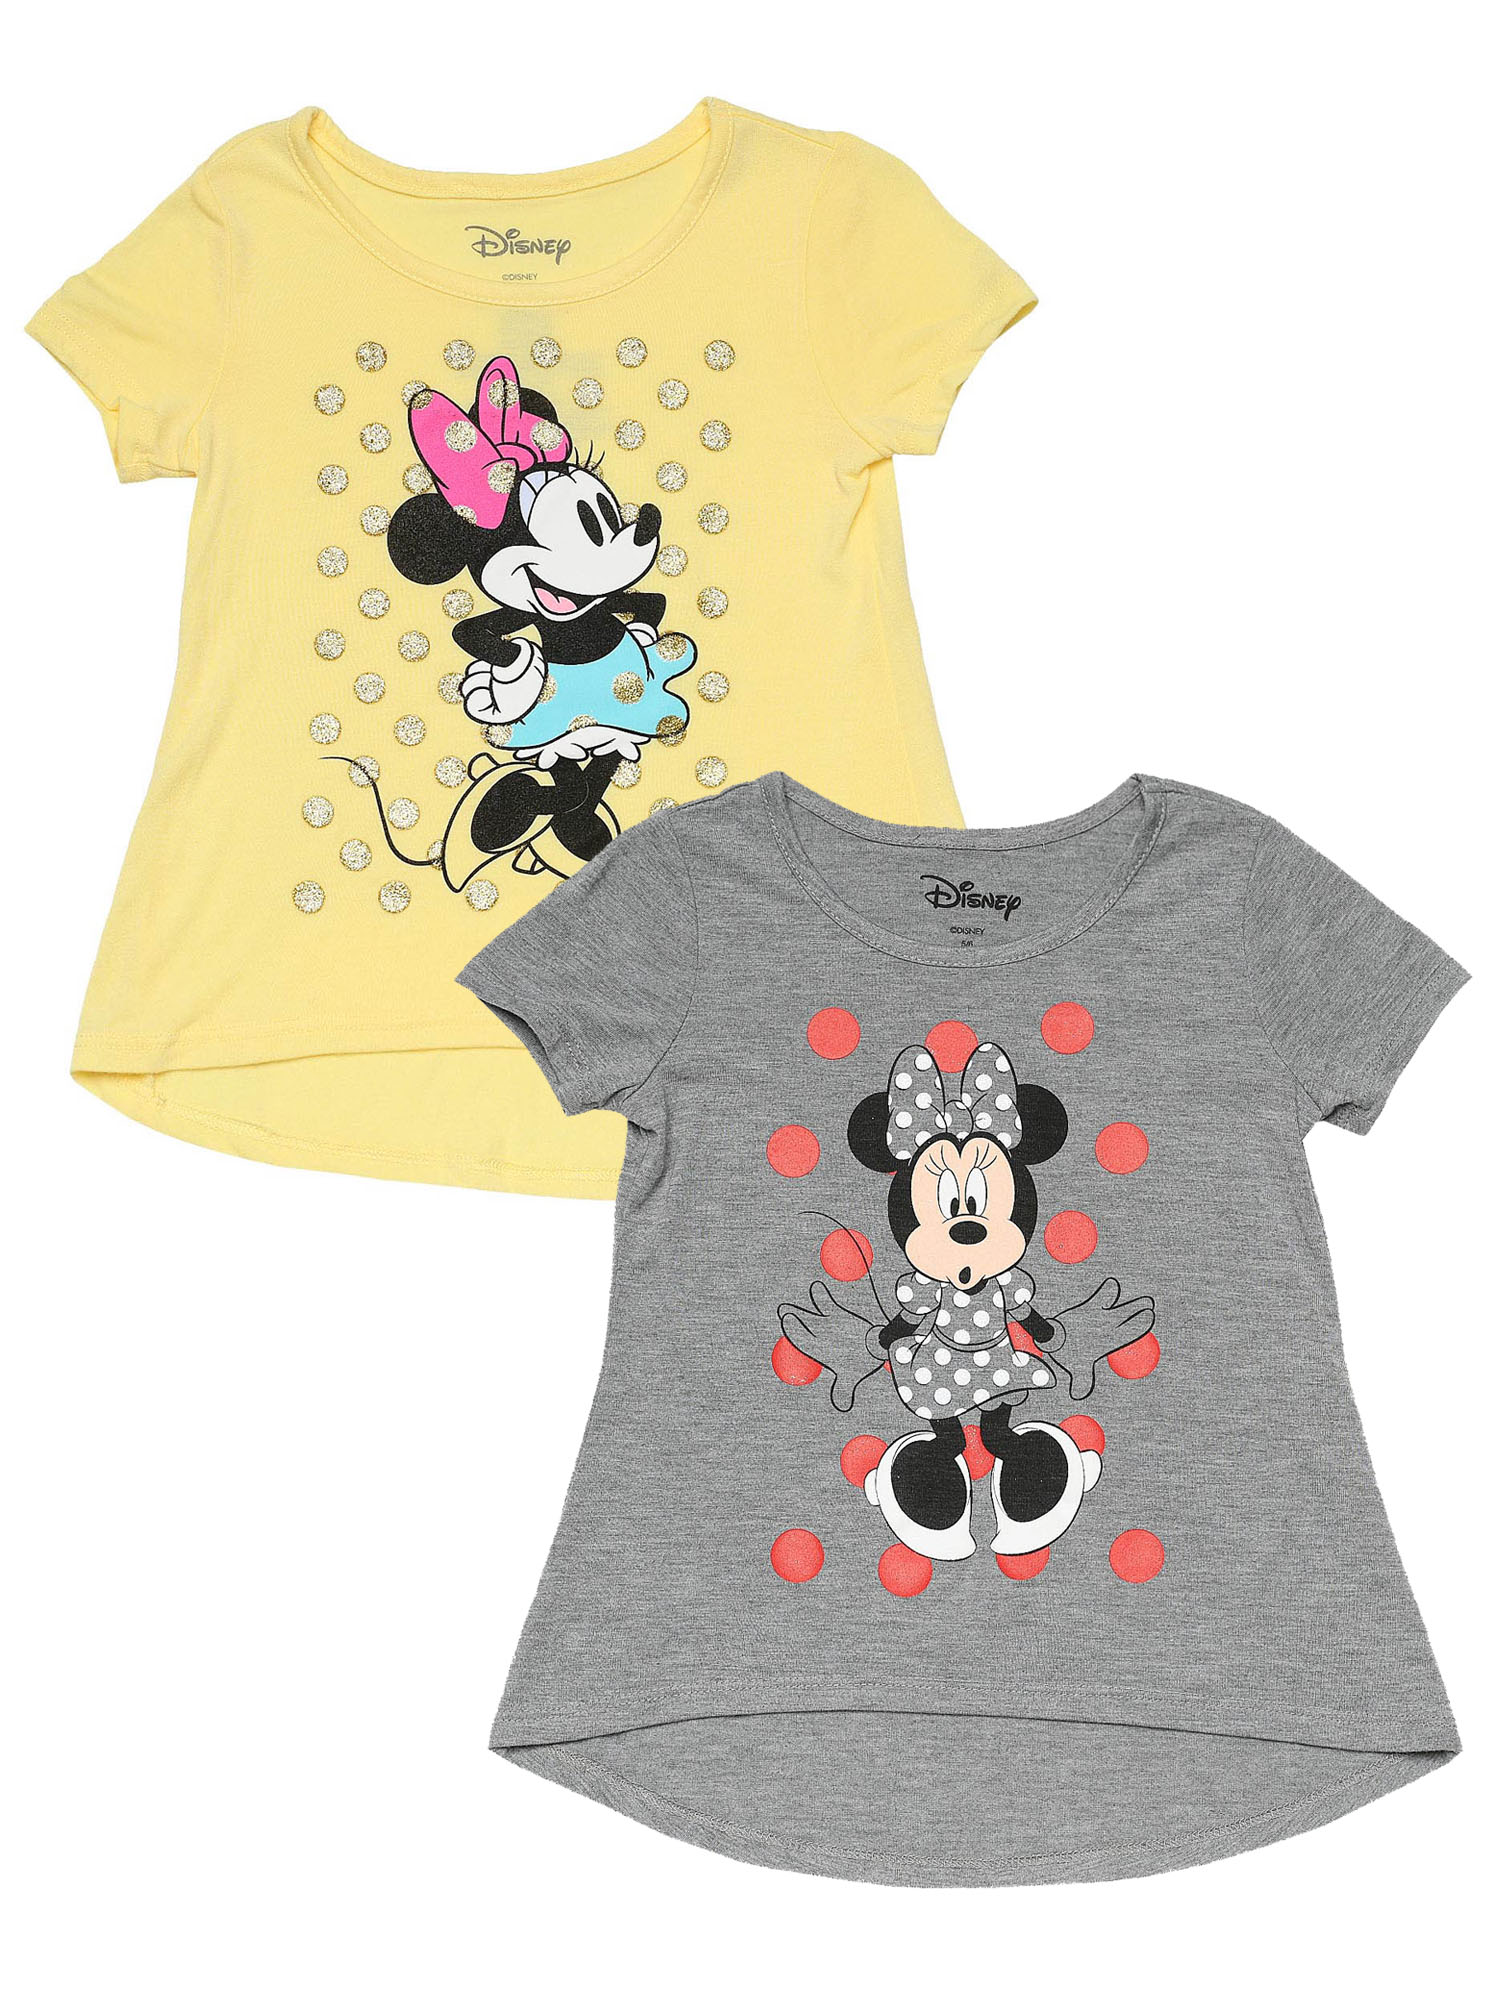 Disney Minnie Mouse Girls 2-Piece Perfect Picture Shorts and Graphic Tee Shirt Set Grey//Pink